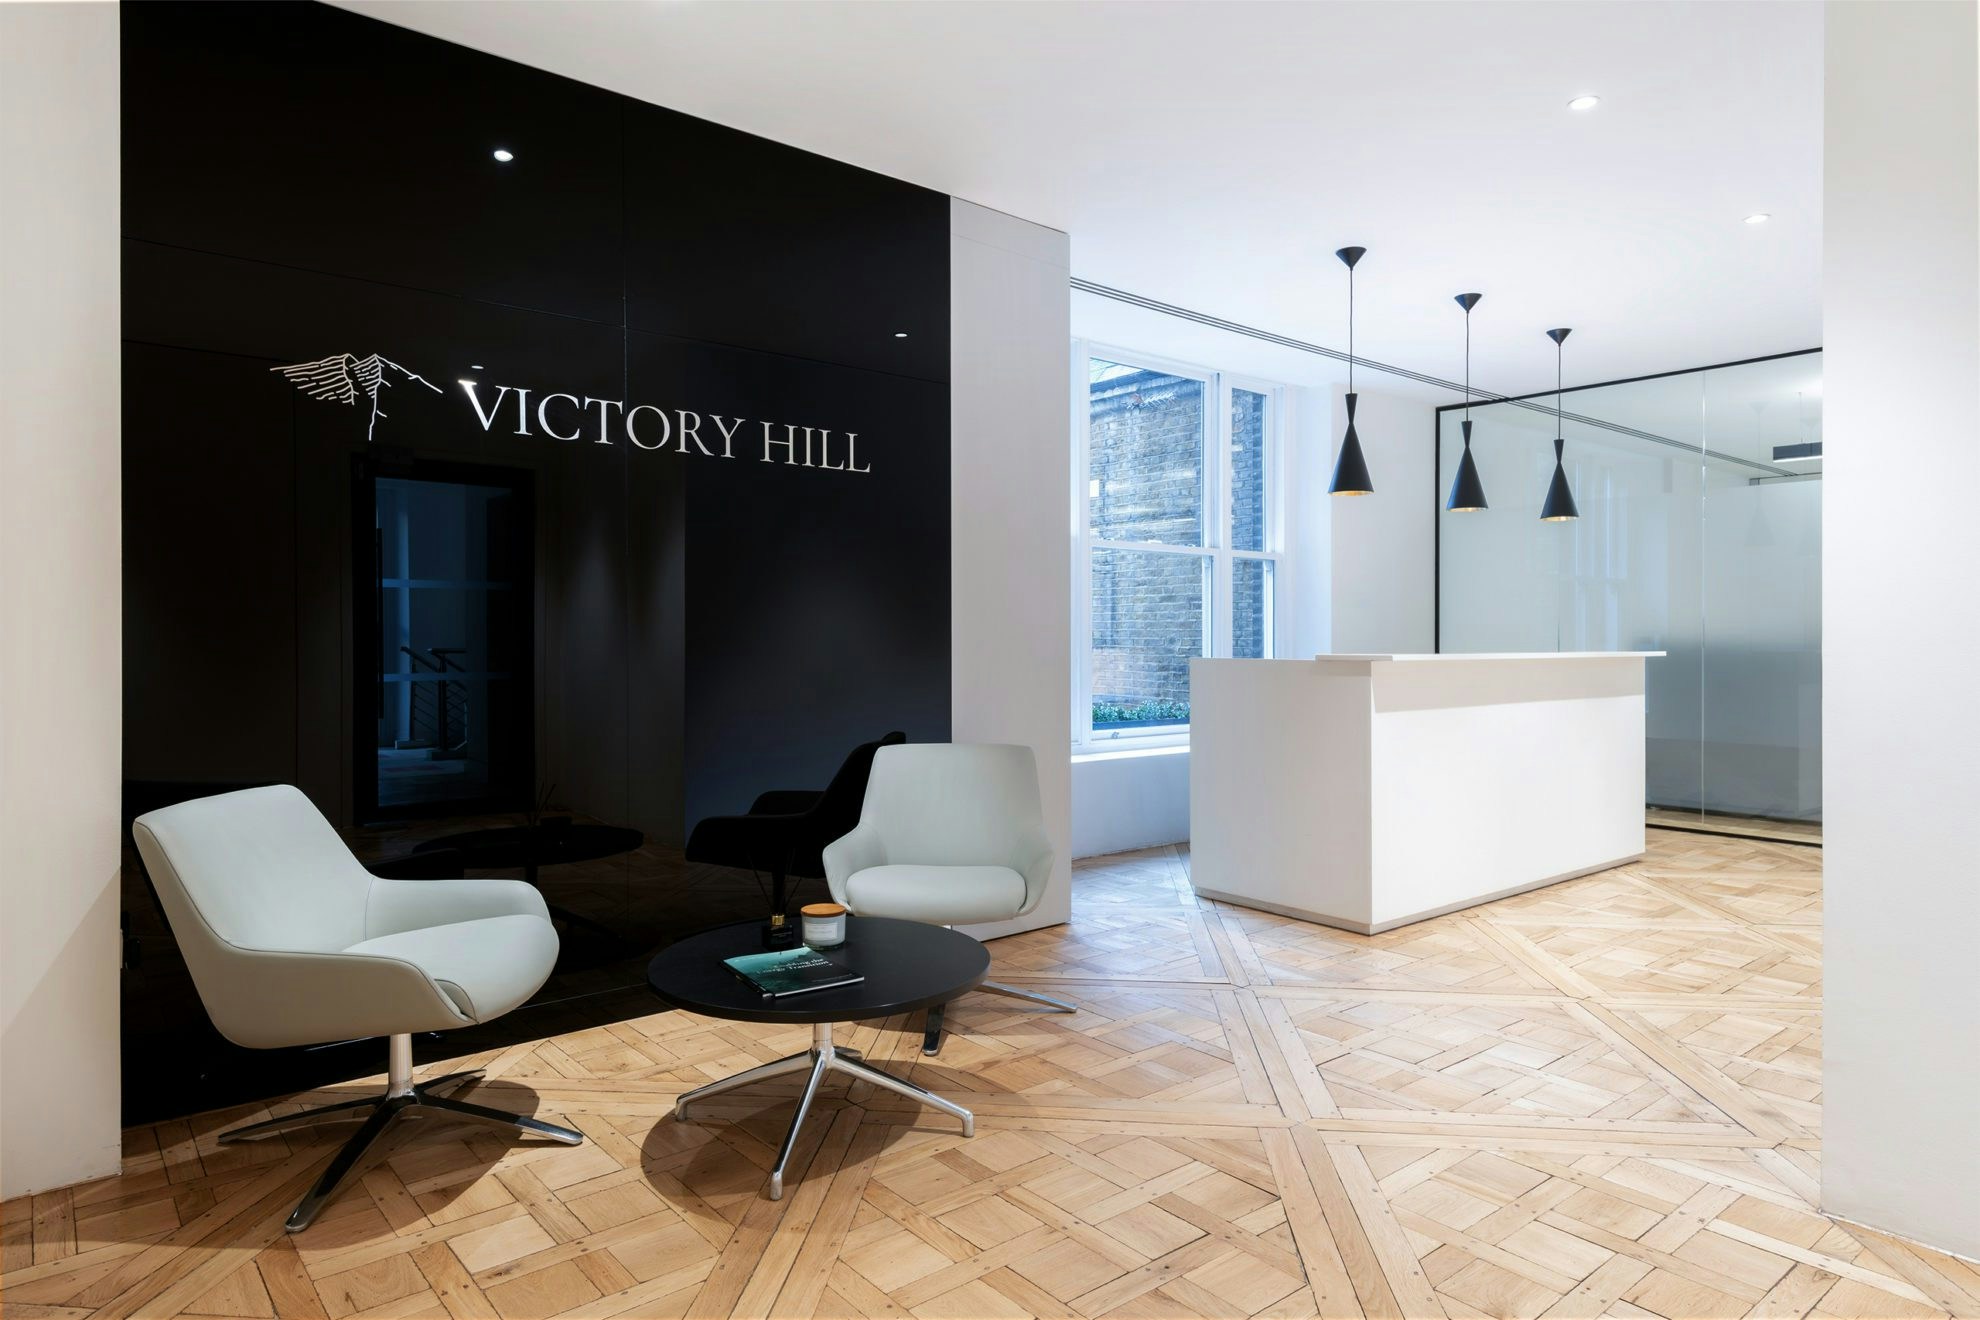 Victory Hill reception